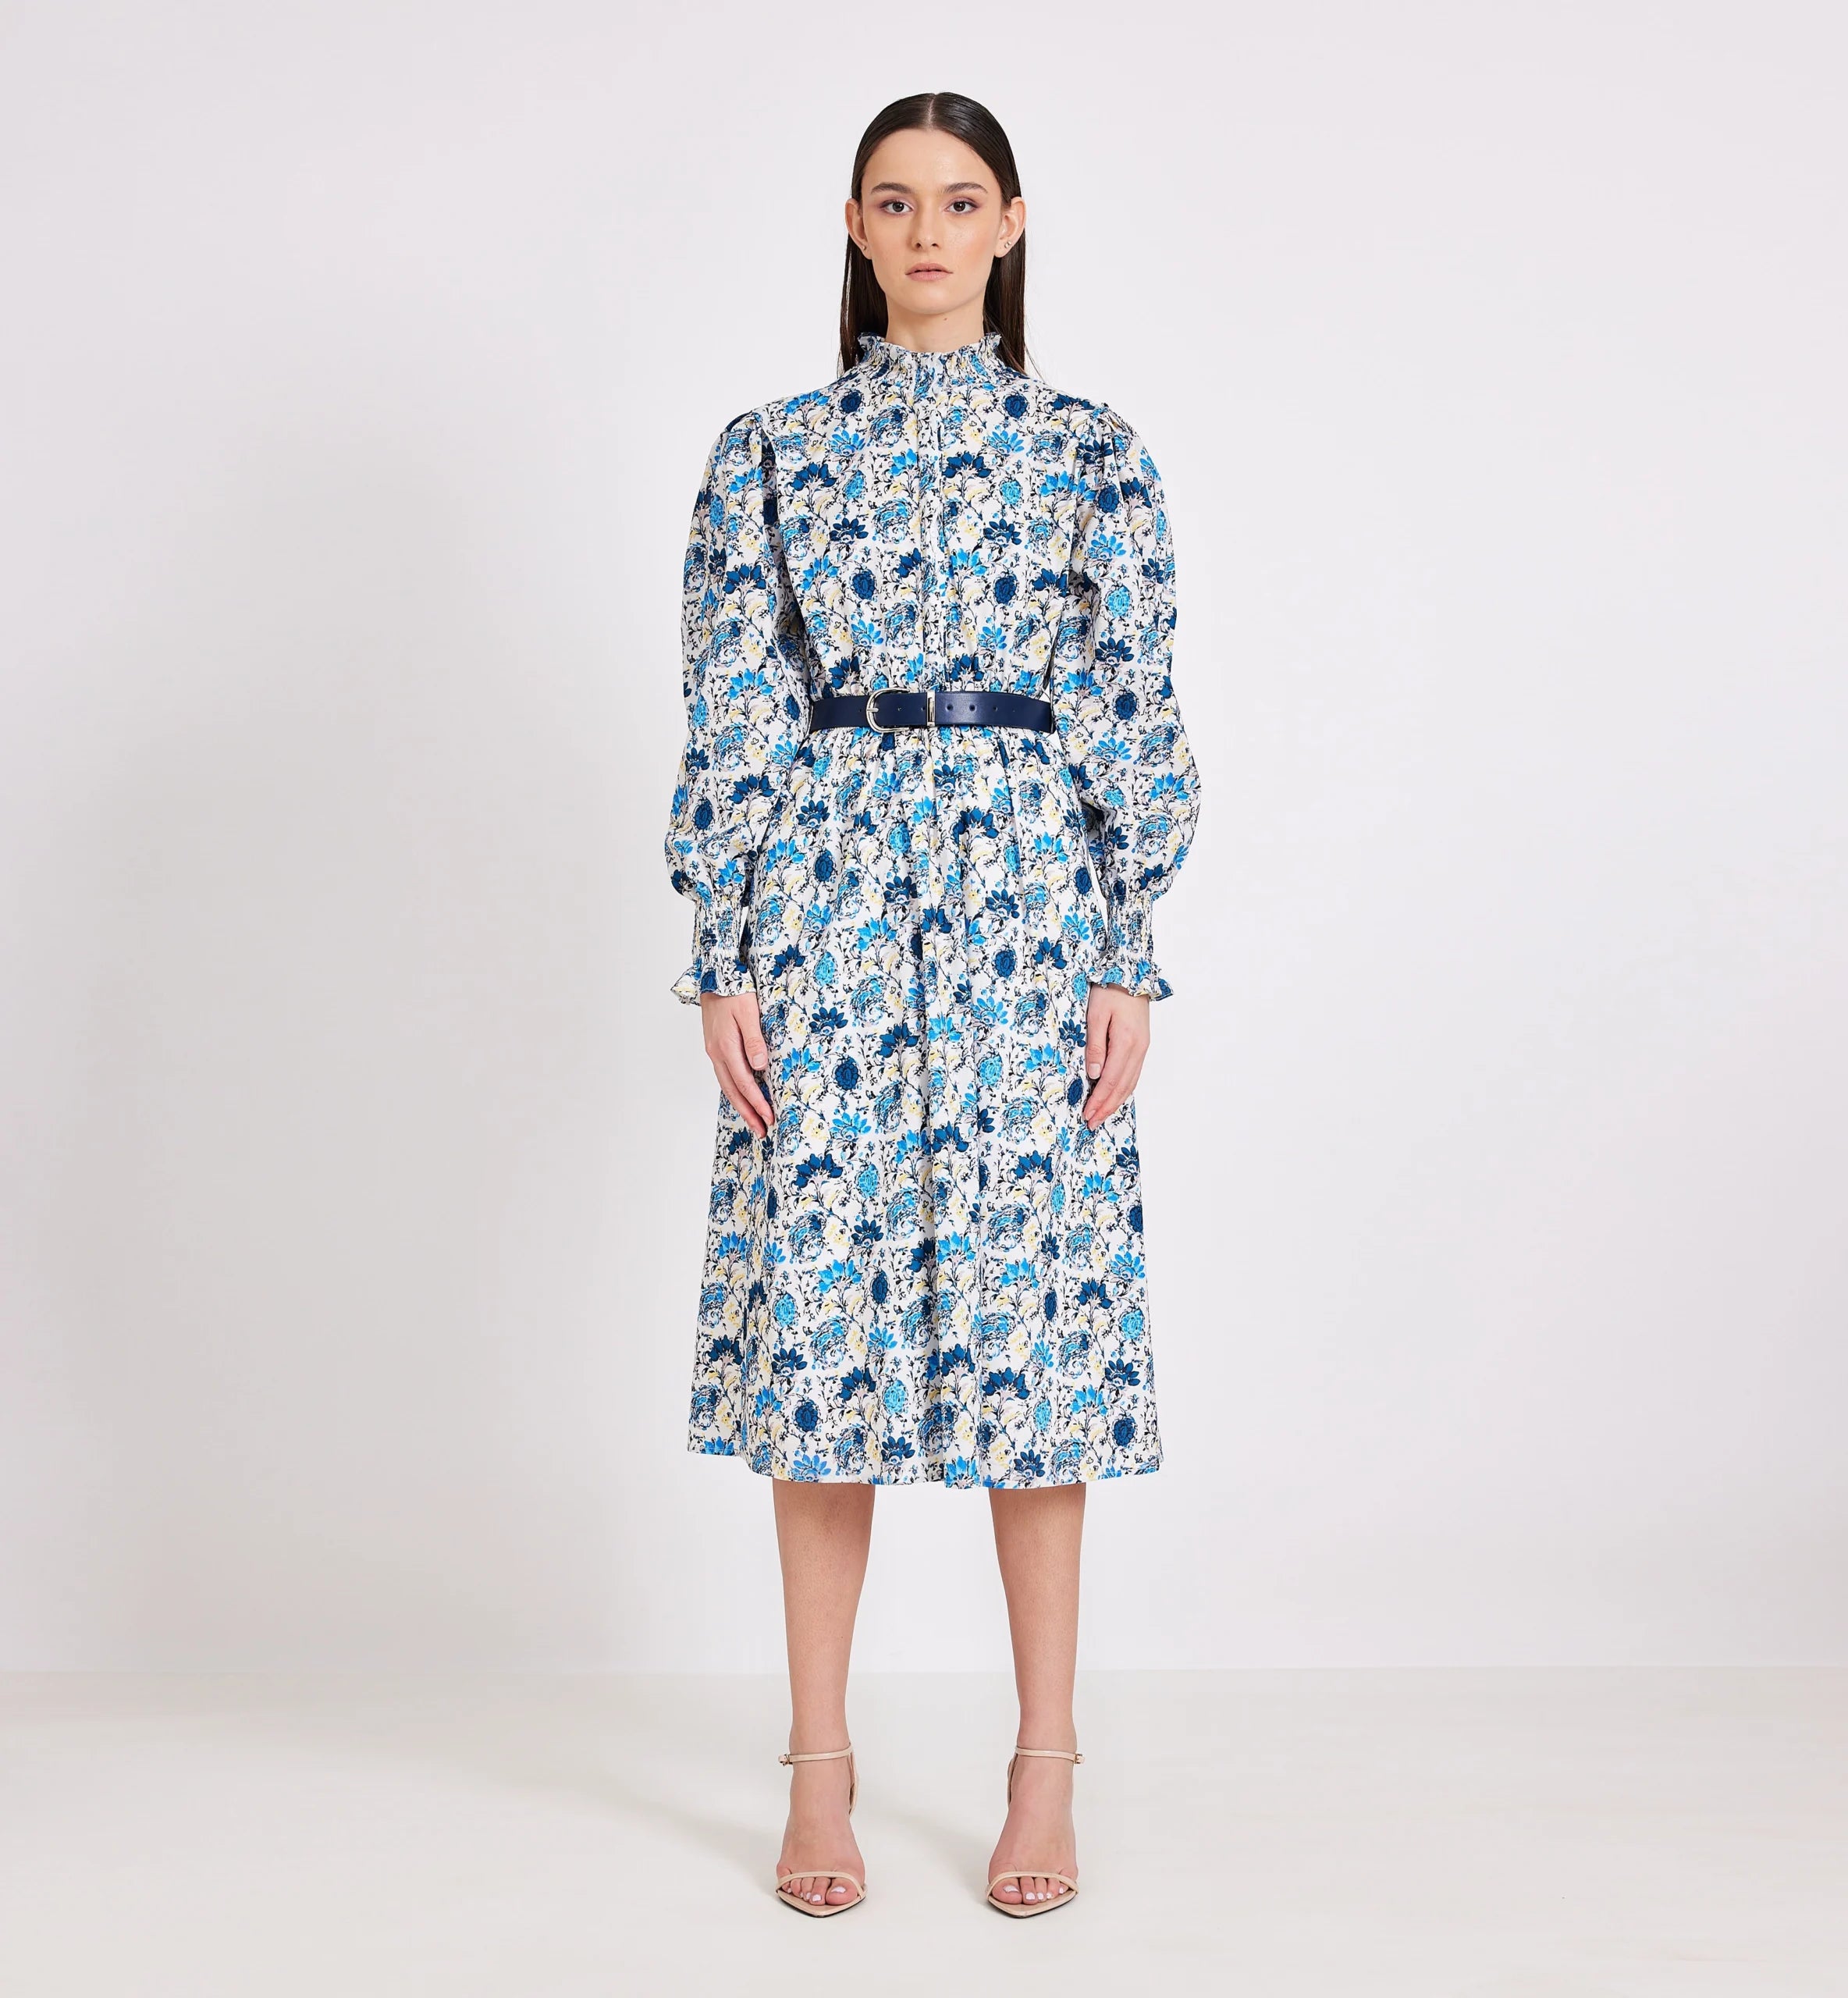 Floral Print Cotton Dress in White&Blue